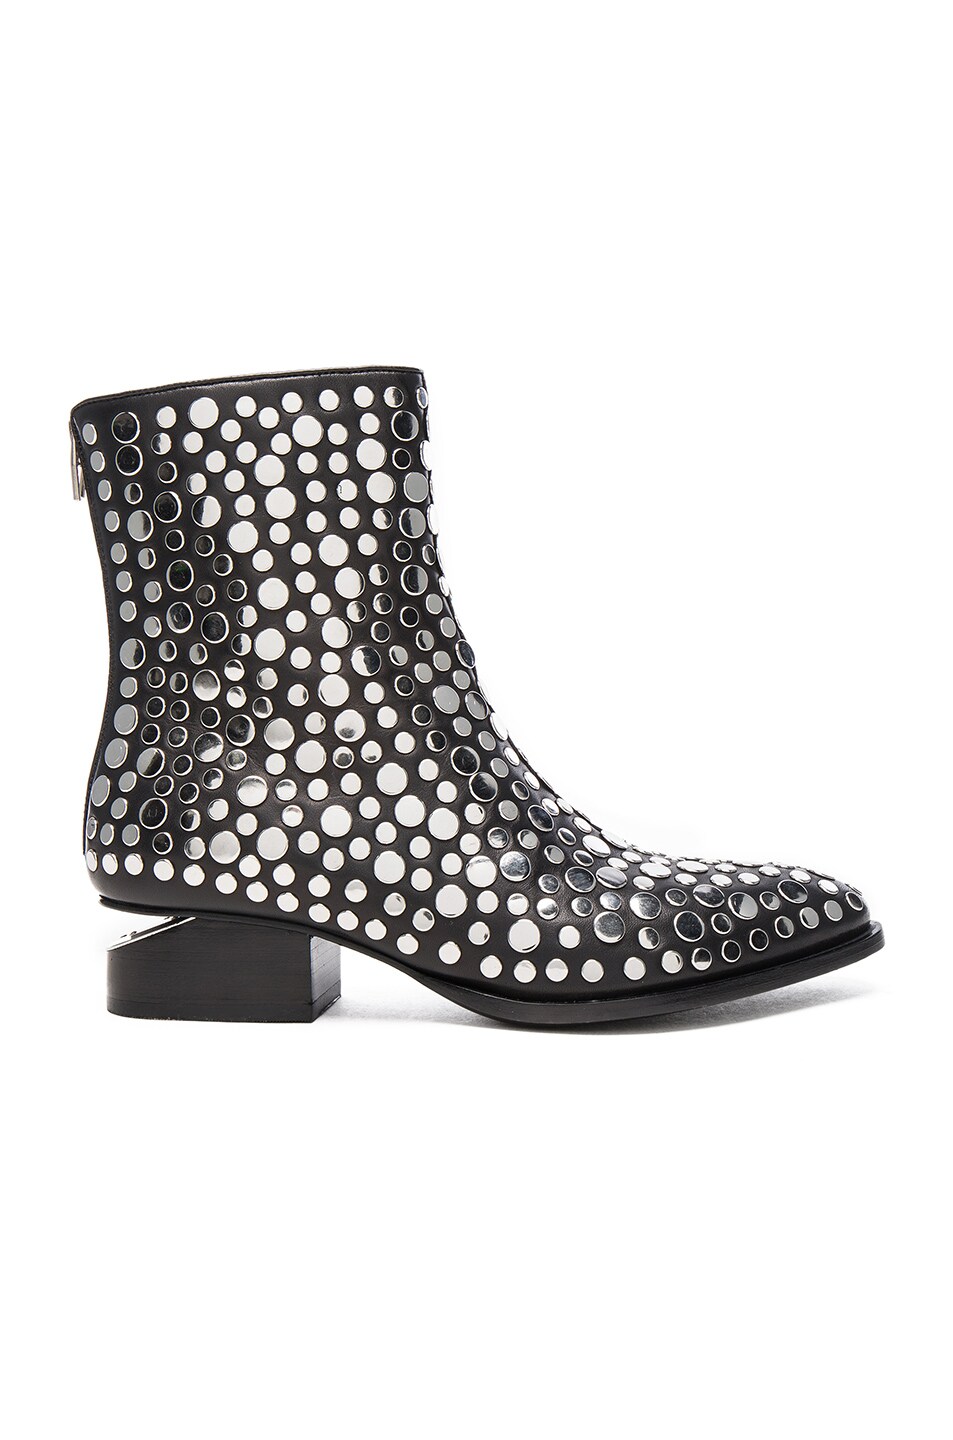 Image 1 of Alexander Wang Studded Leather Anouk Booties in Black